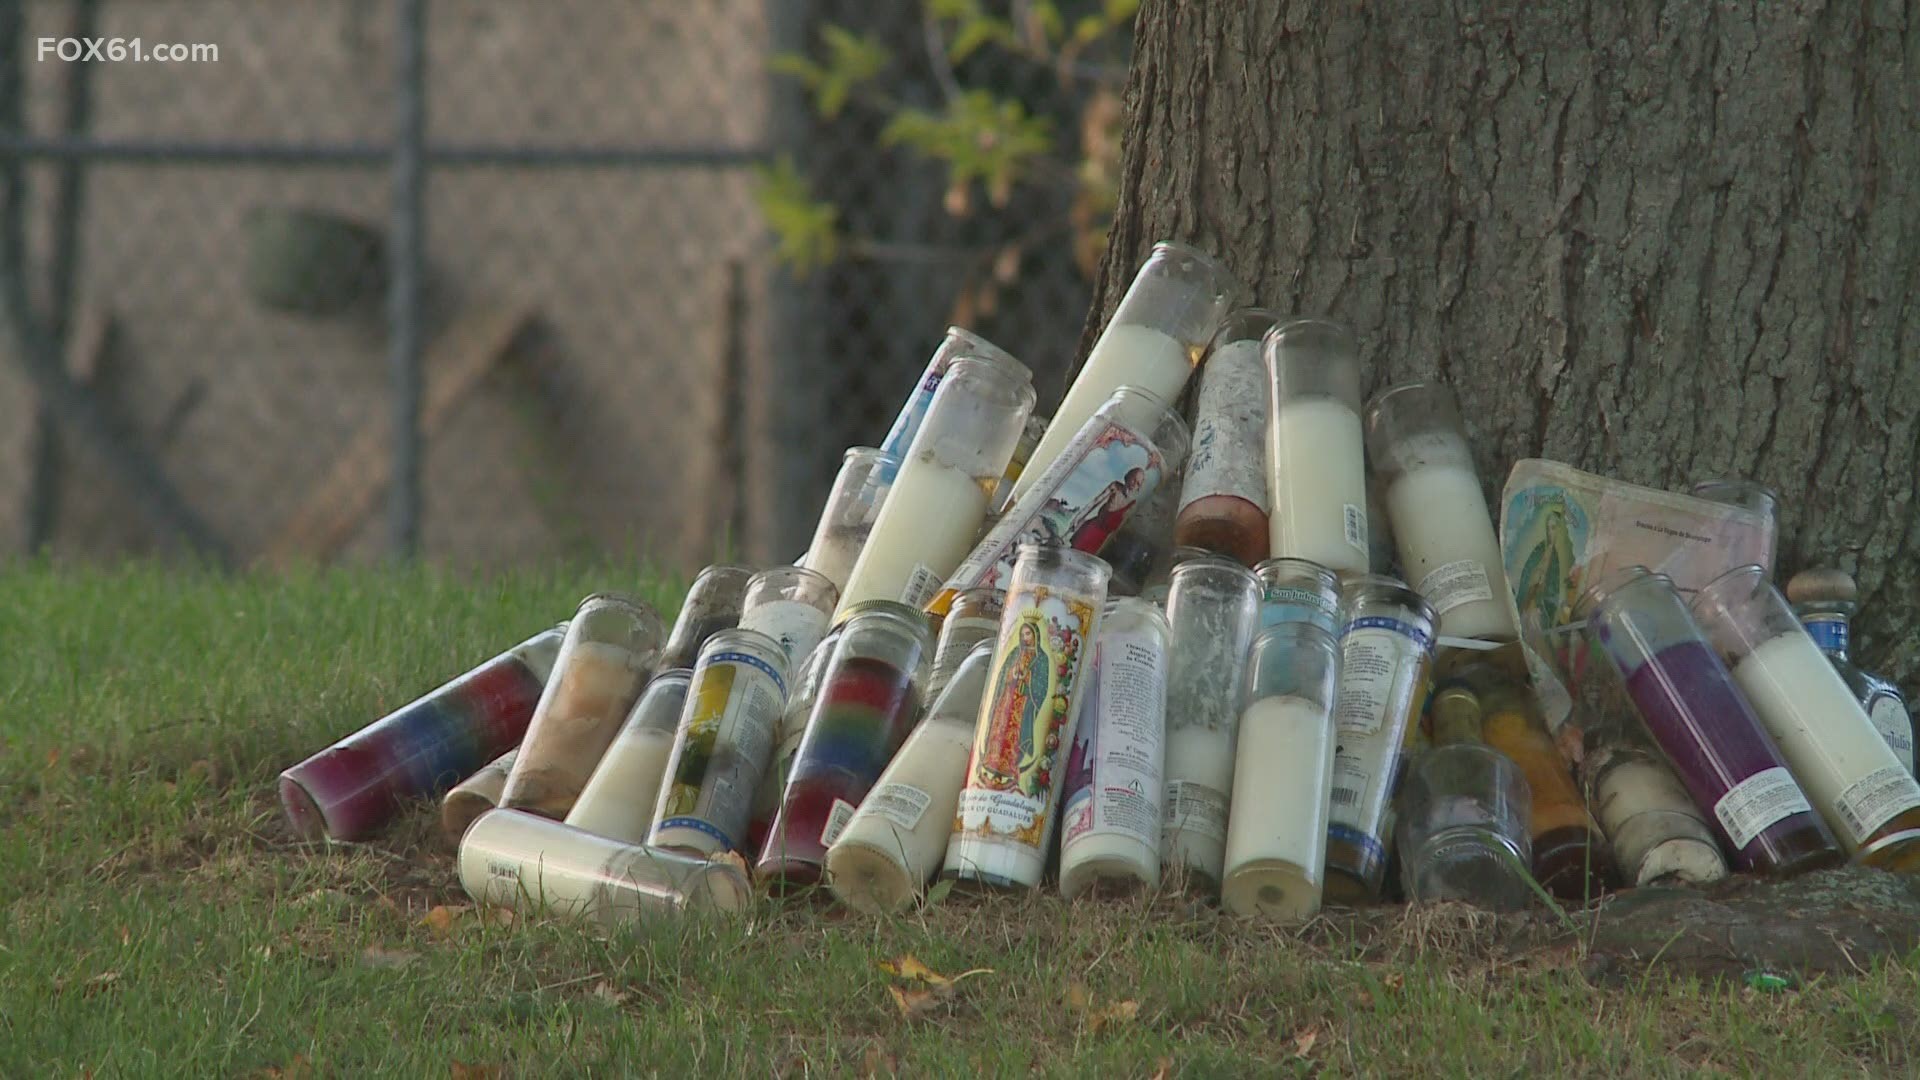 Neighbors say police are working hard, but are still rattled by an increase in gun violence.